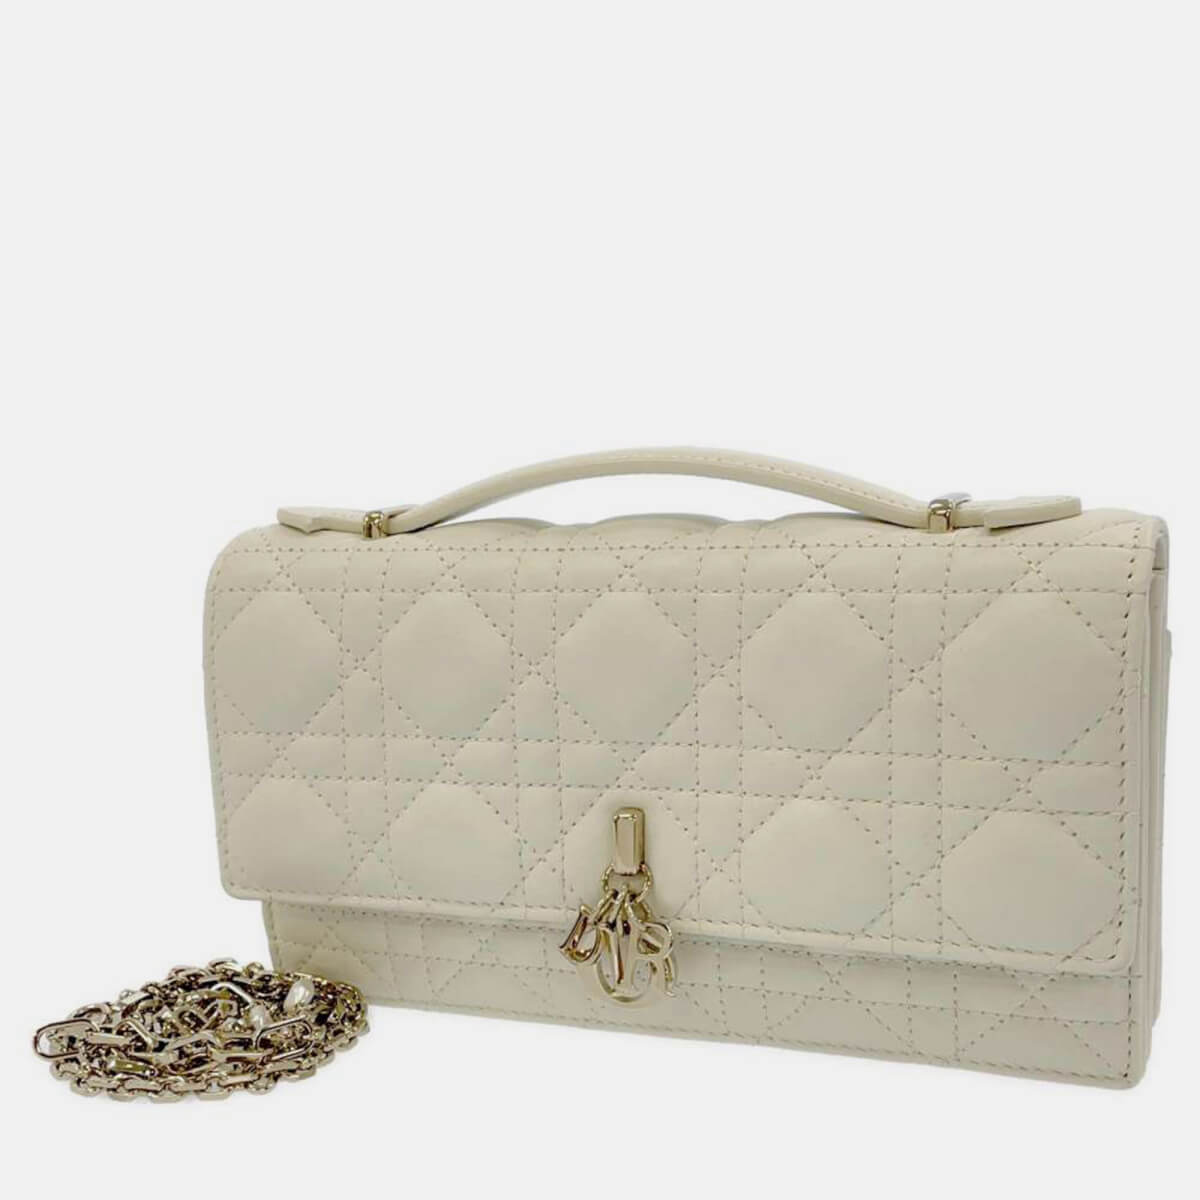 Dior White Leather Small Miss Dior Shoulder Bag